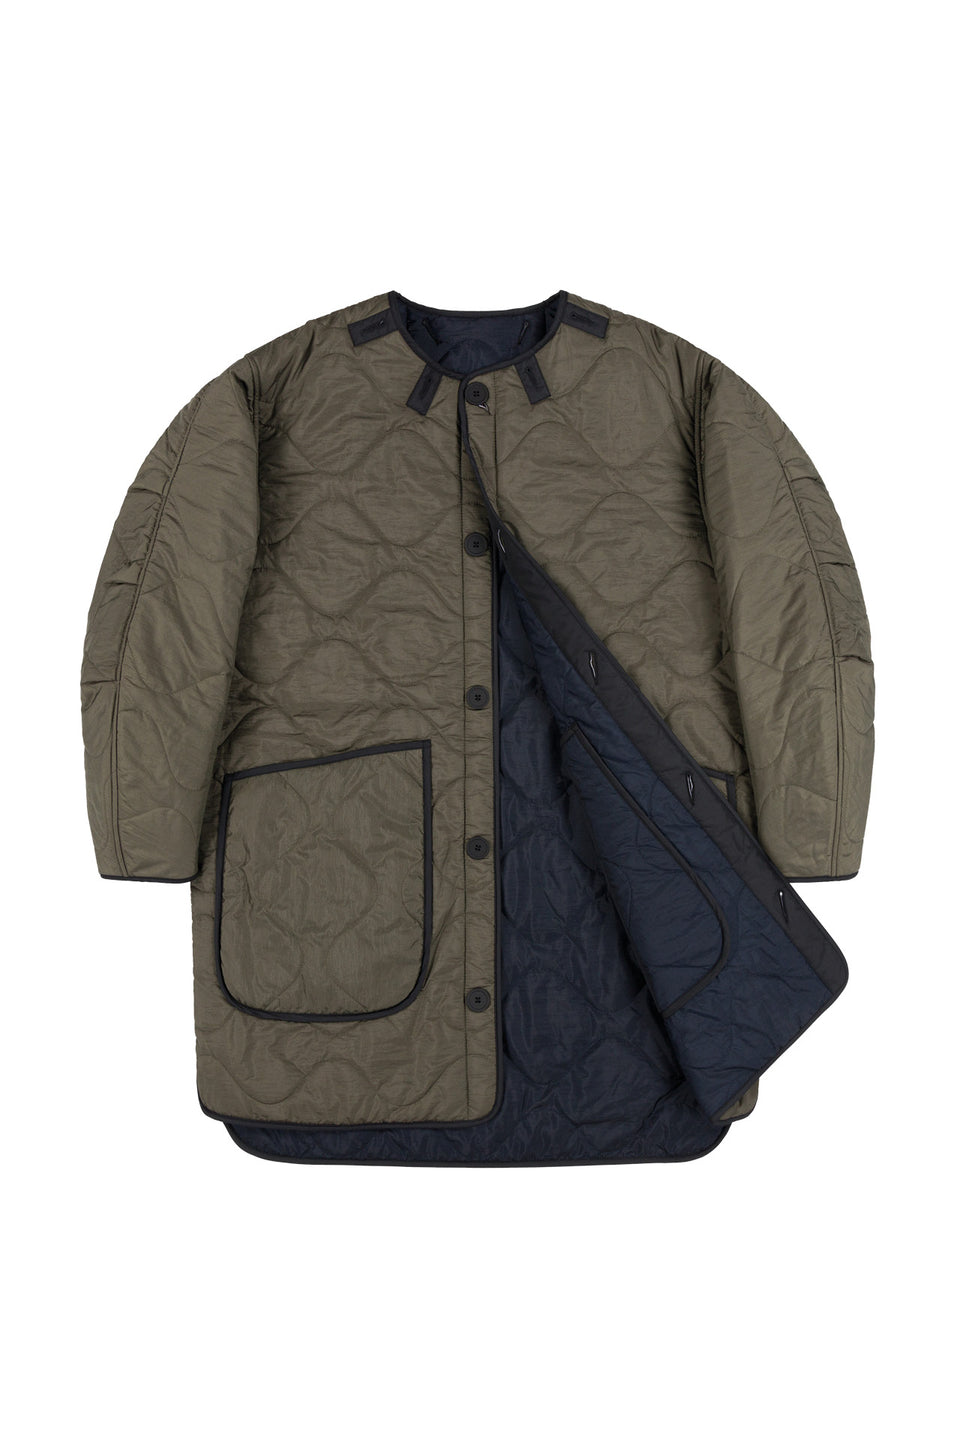 Signature Quilt Jacket - Navy / Dark Olive (listing page thumbnail)